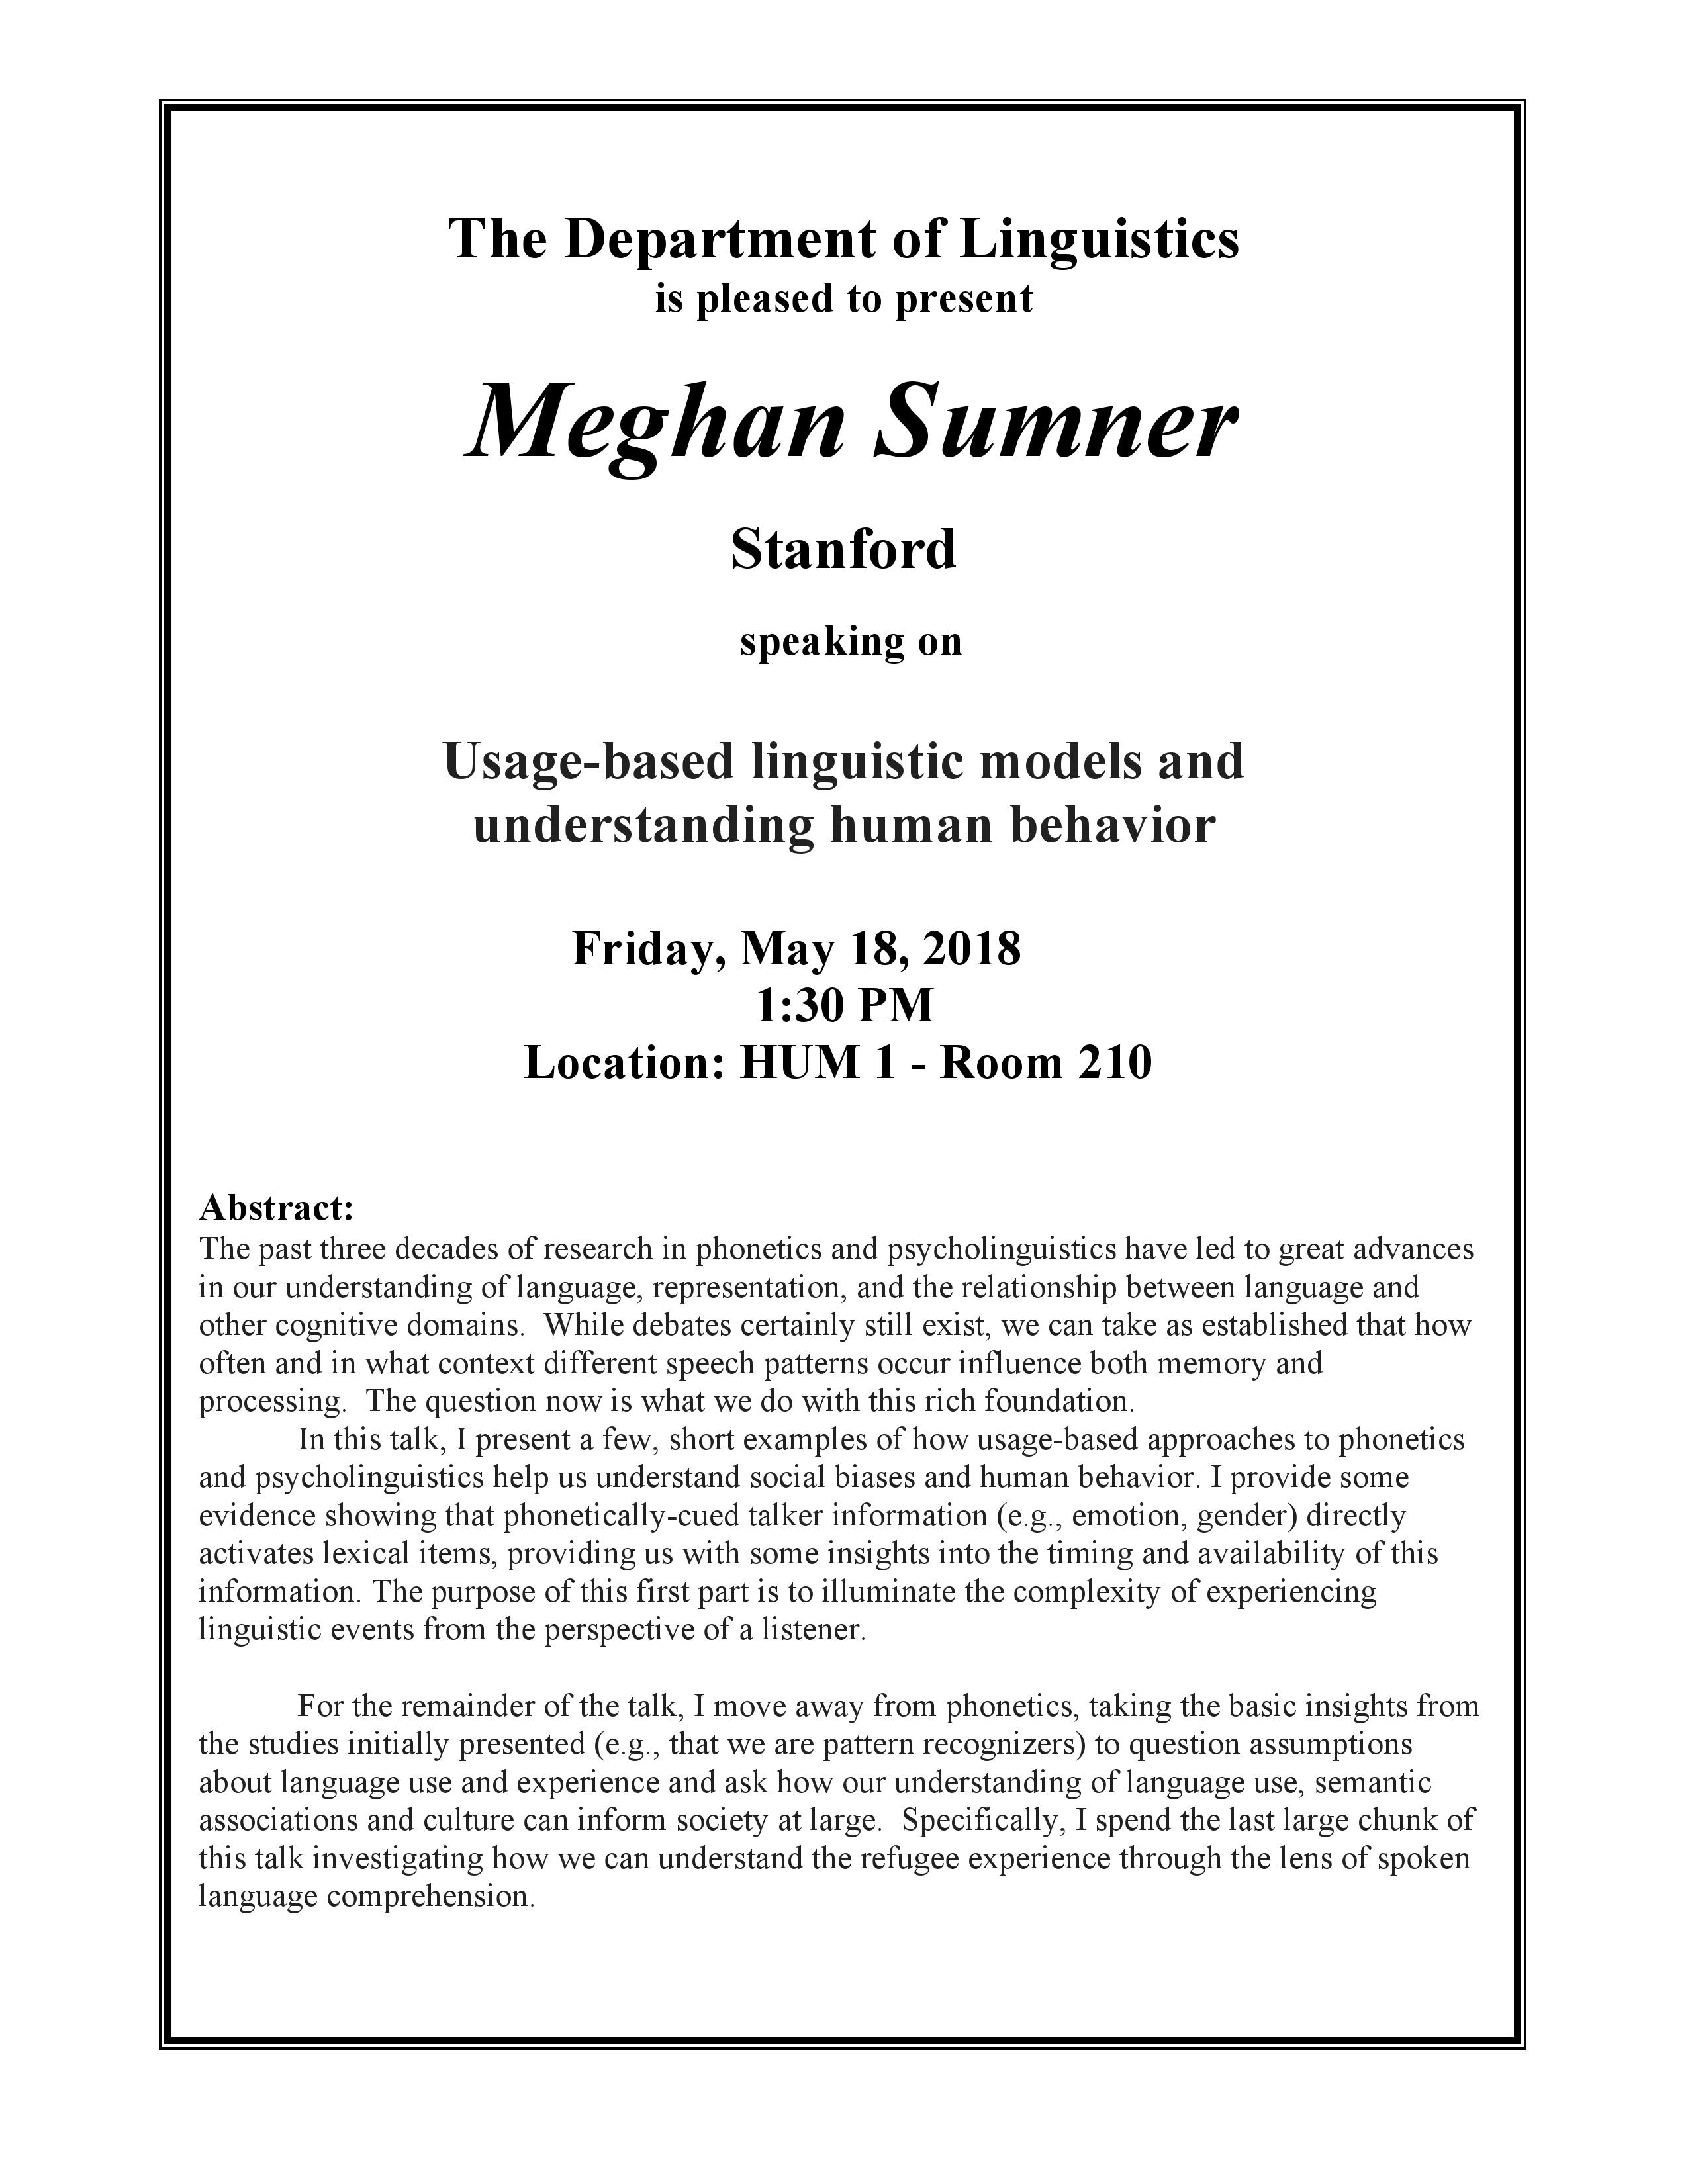 Meghan Sumner in large font, information about the event in text below.